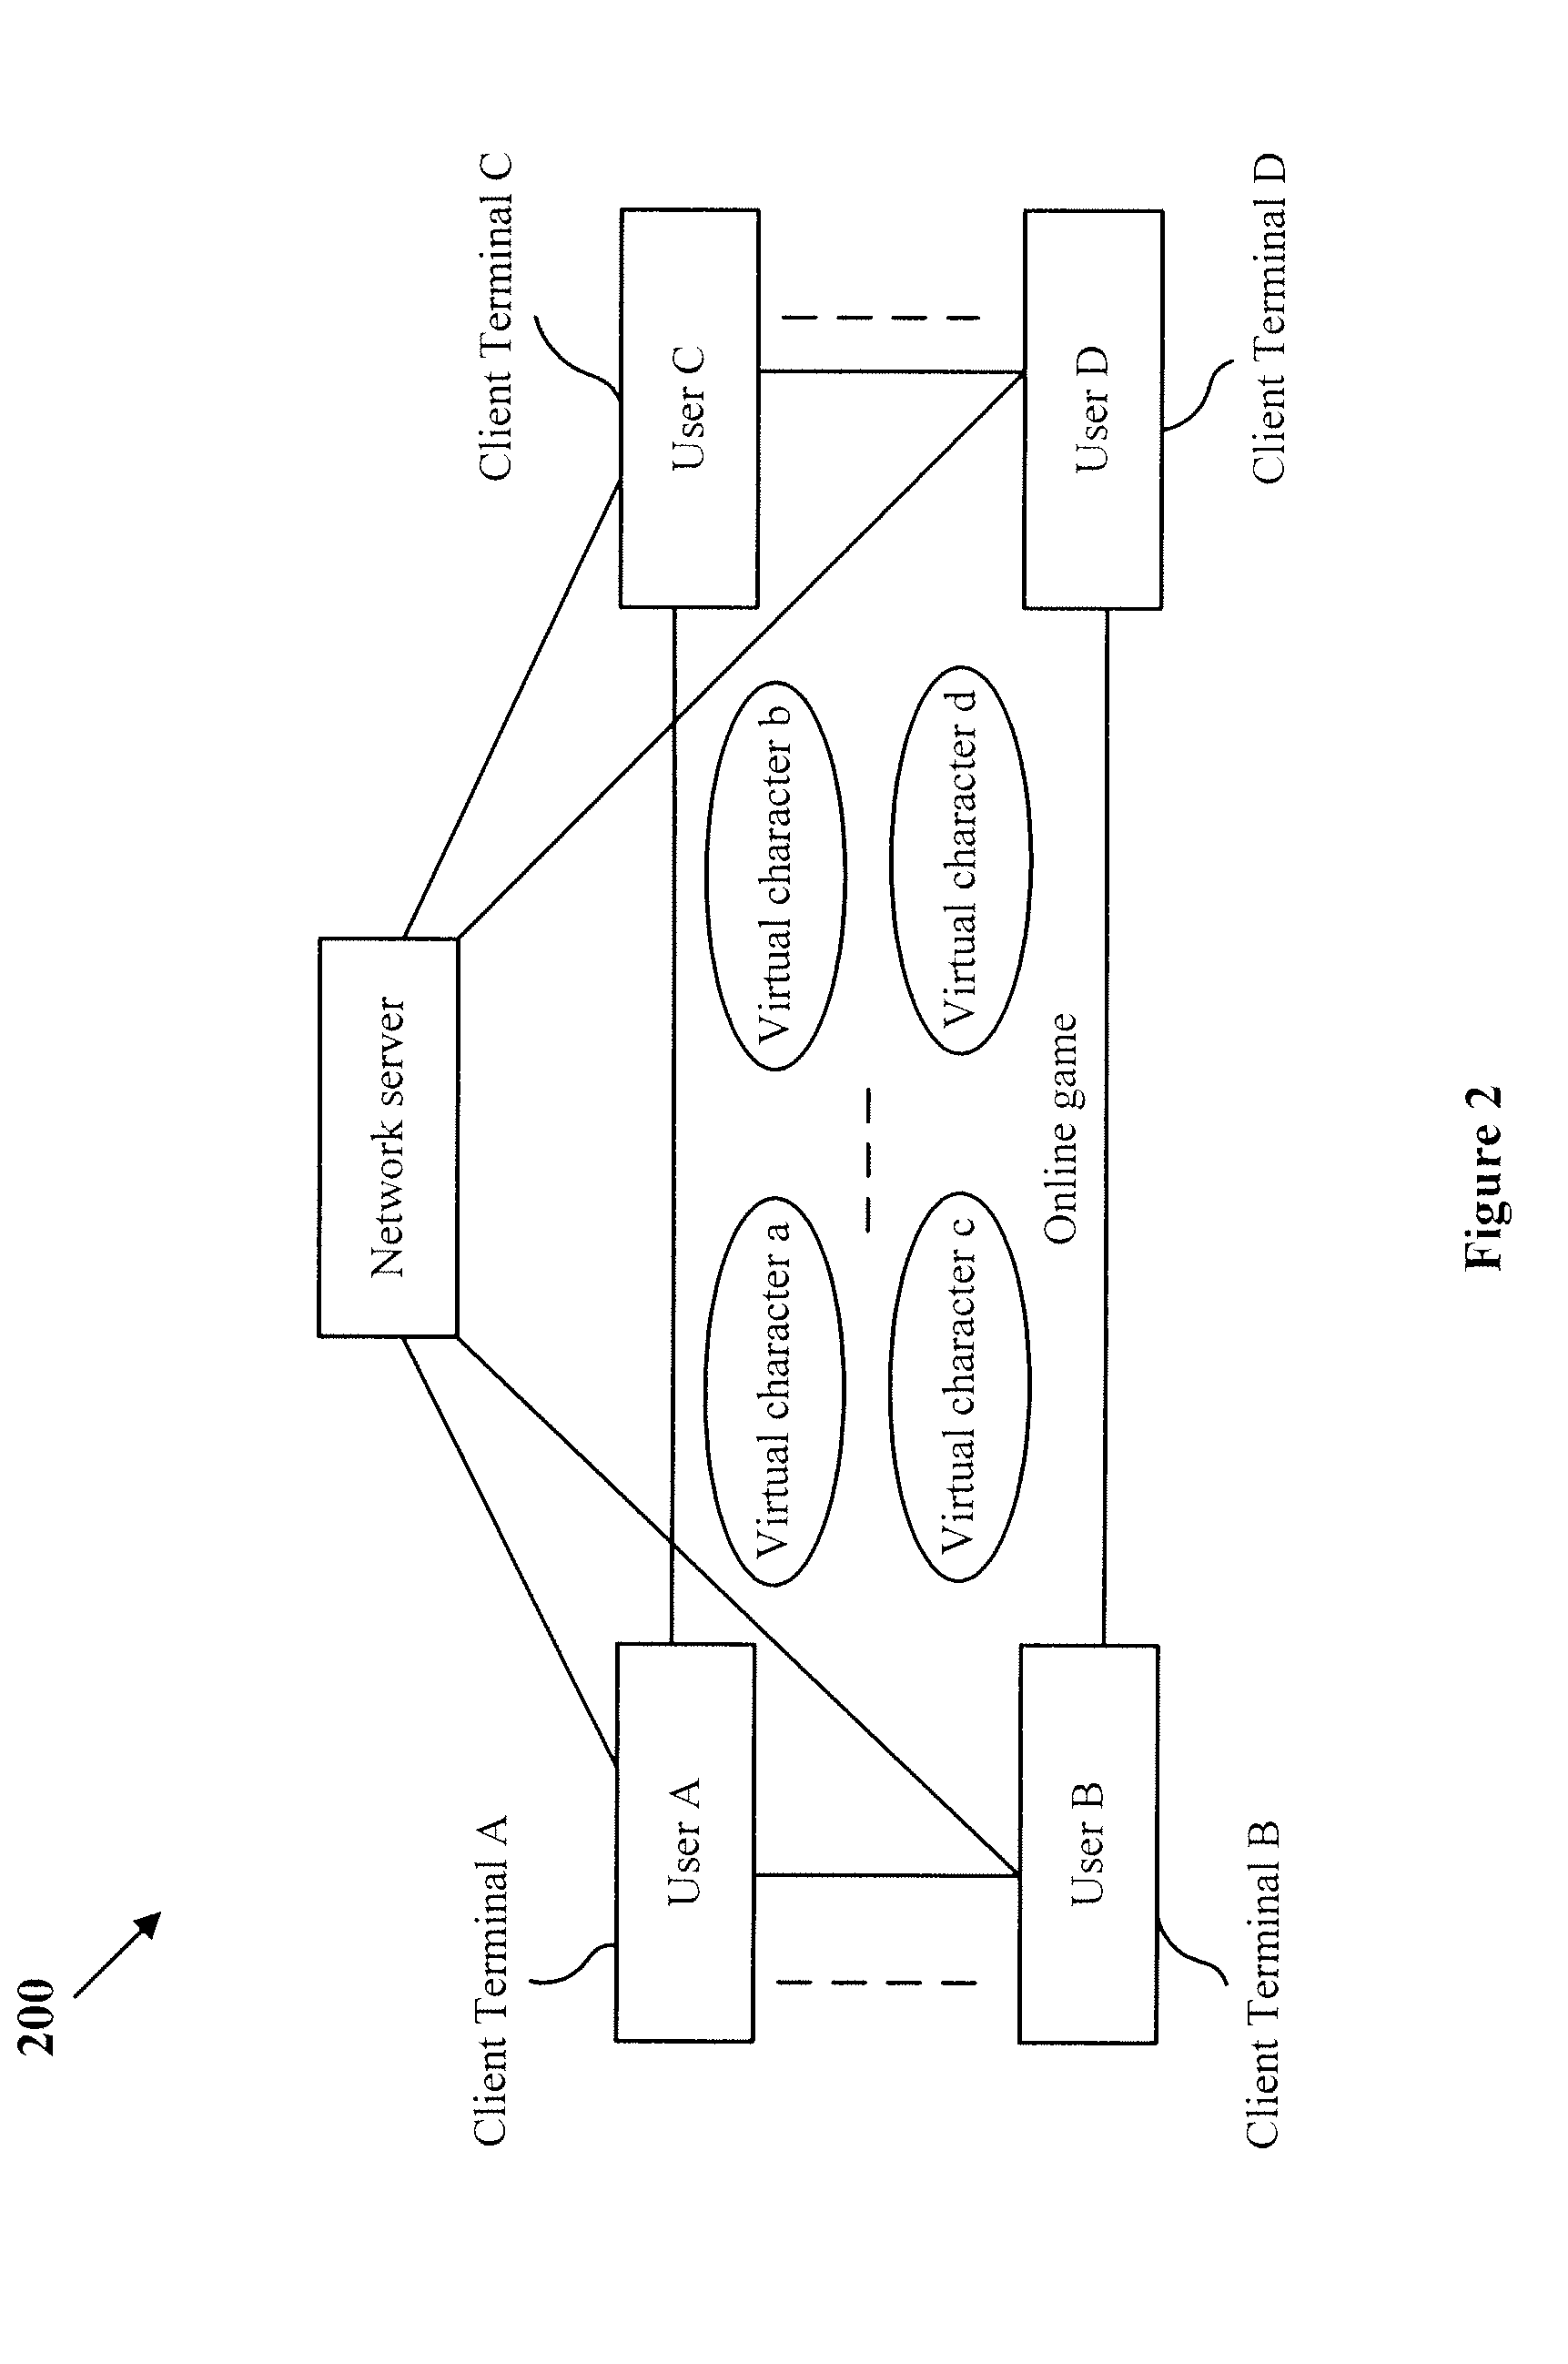 Methods and systems for realizing interaction between video input and virtual network scene